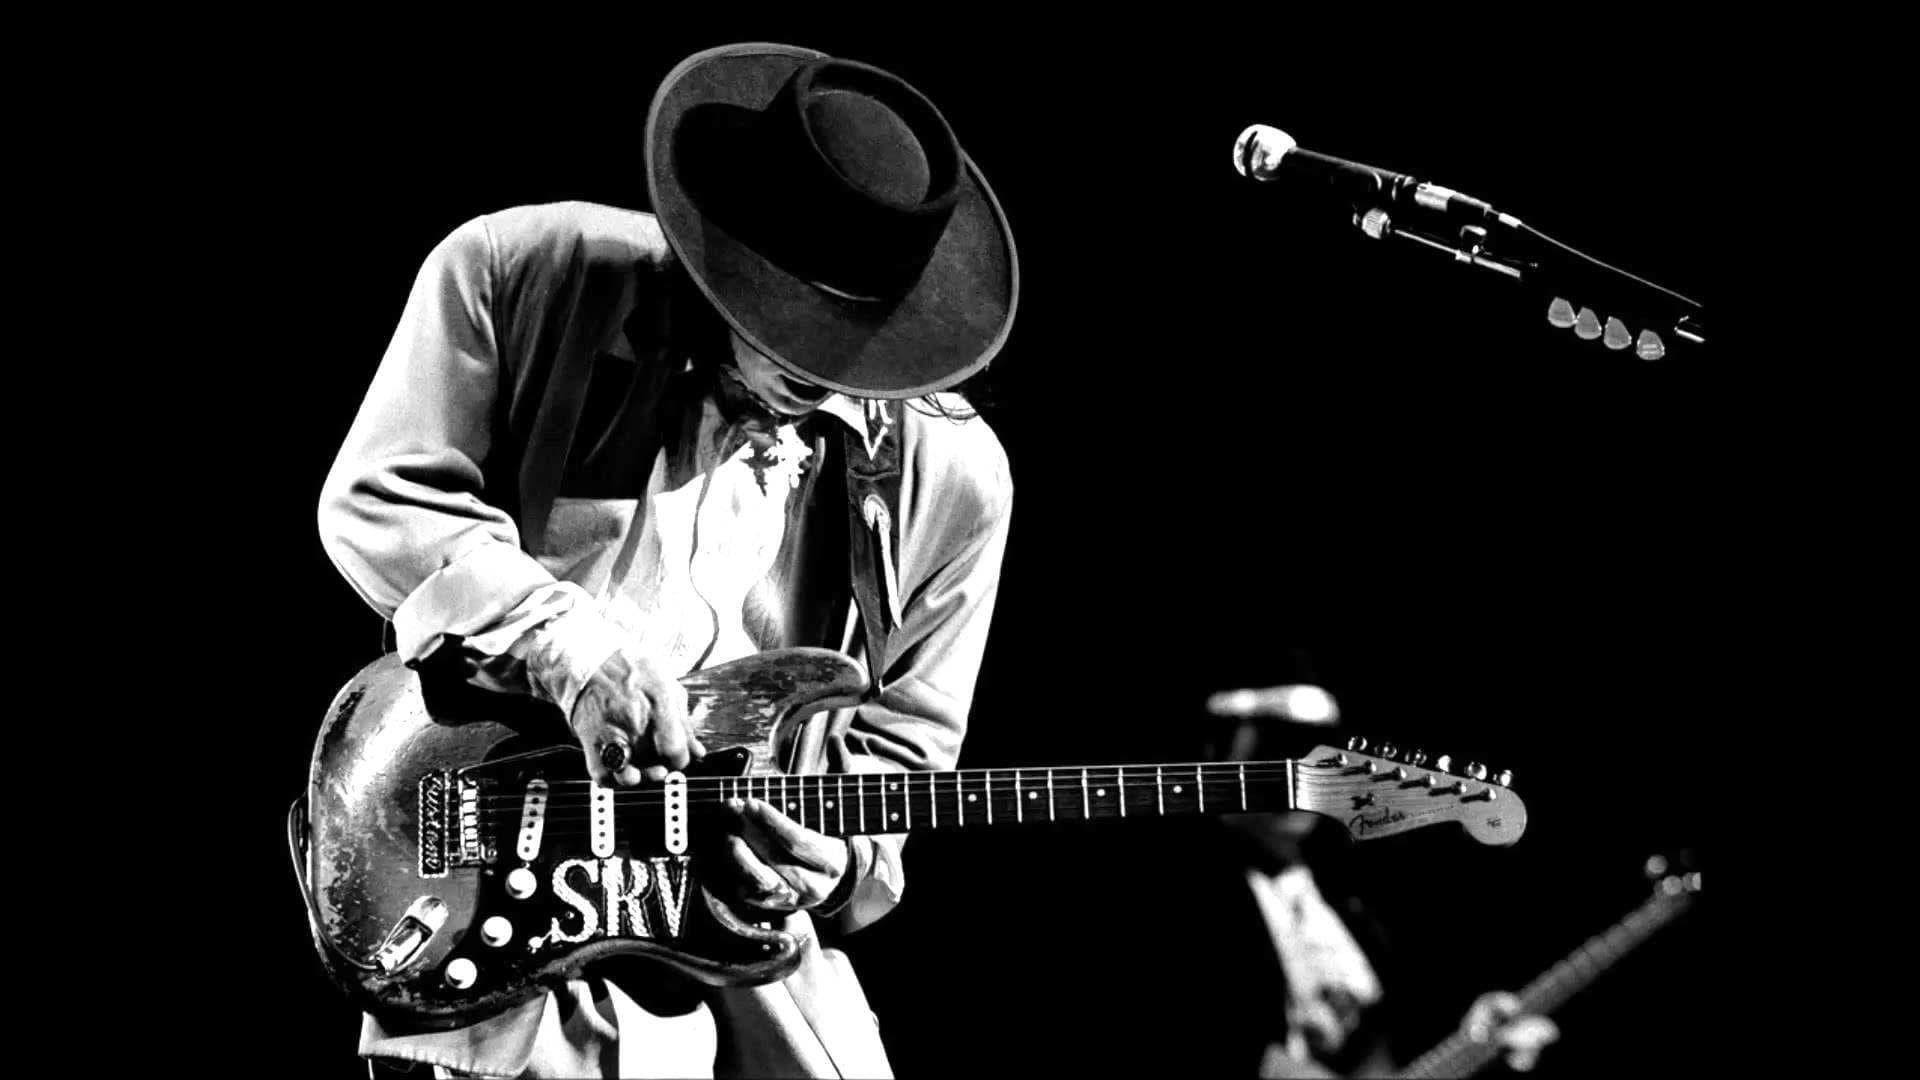 Stevie Ray Vaughan - Live in Tokyo backdrop